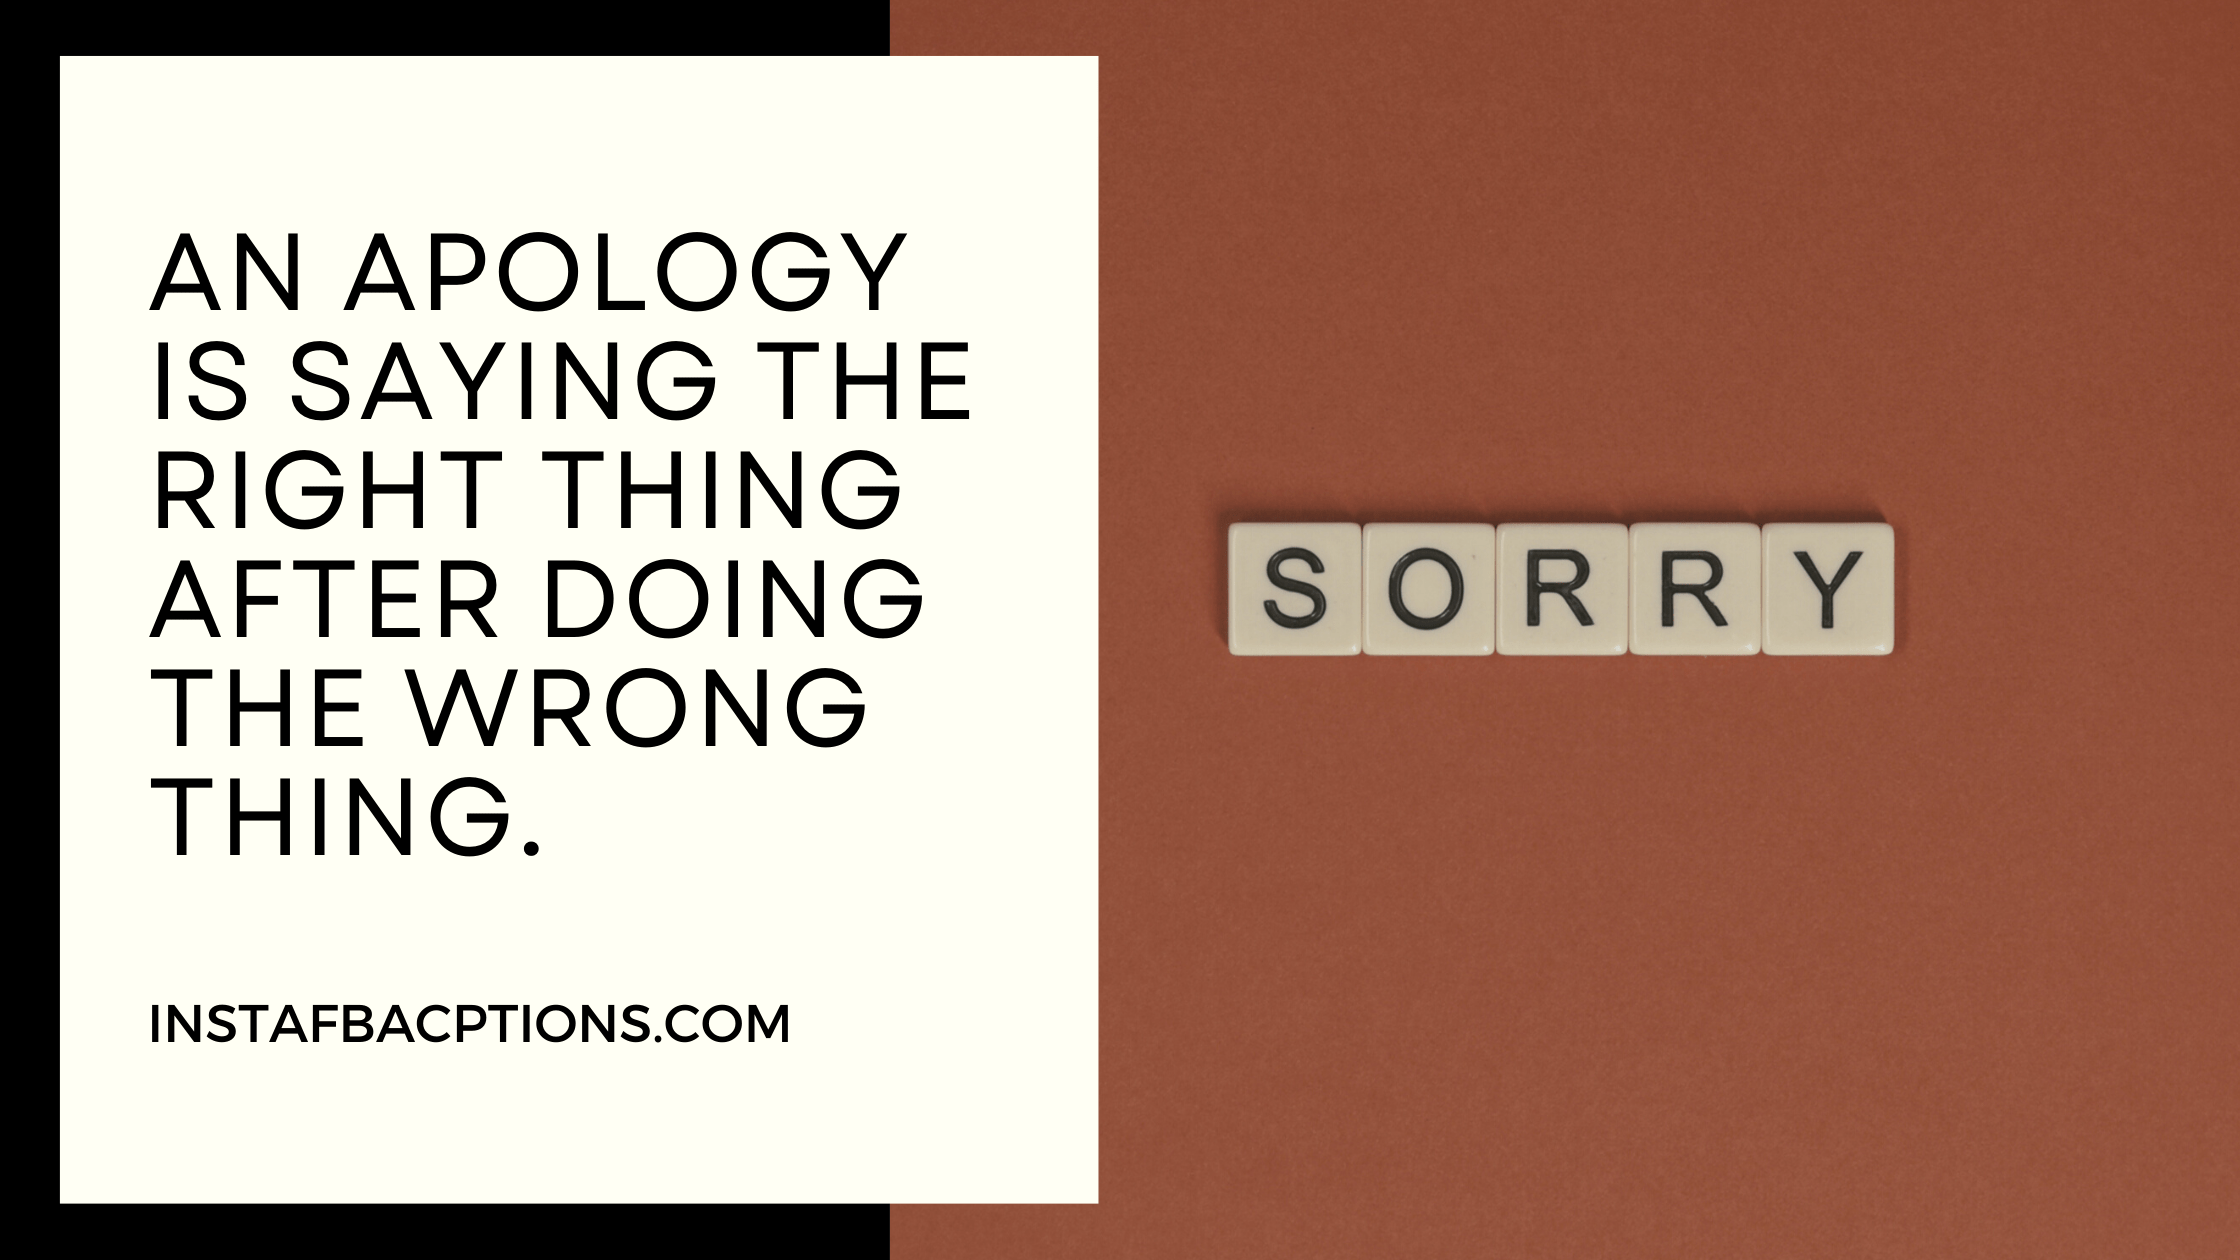 Sad Apology Captions  - Sad Apology Captions - 98+ Sorry Apology Instagram Captions and Quotes in 2023